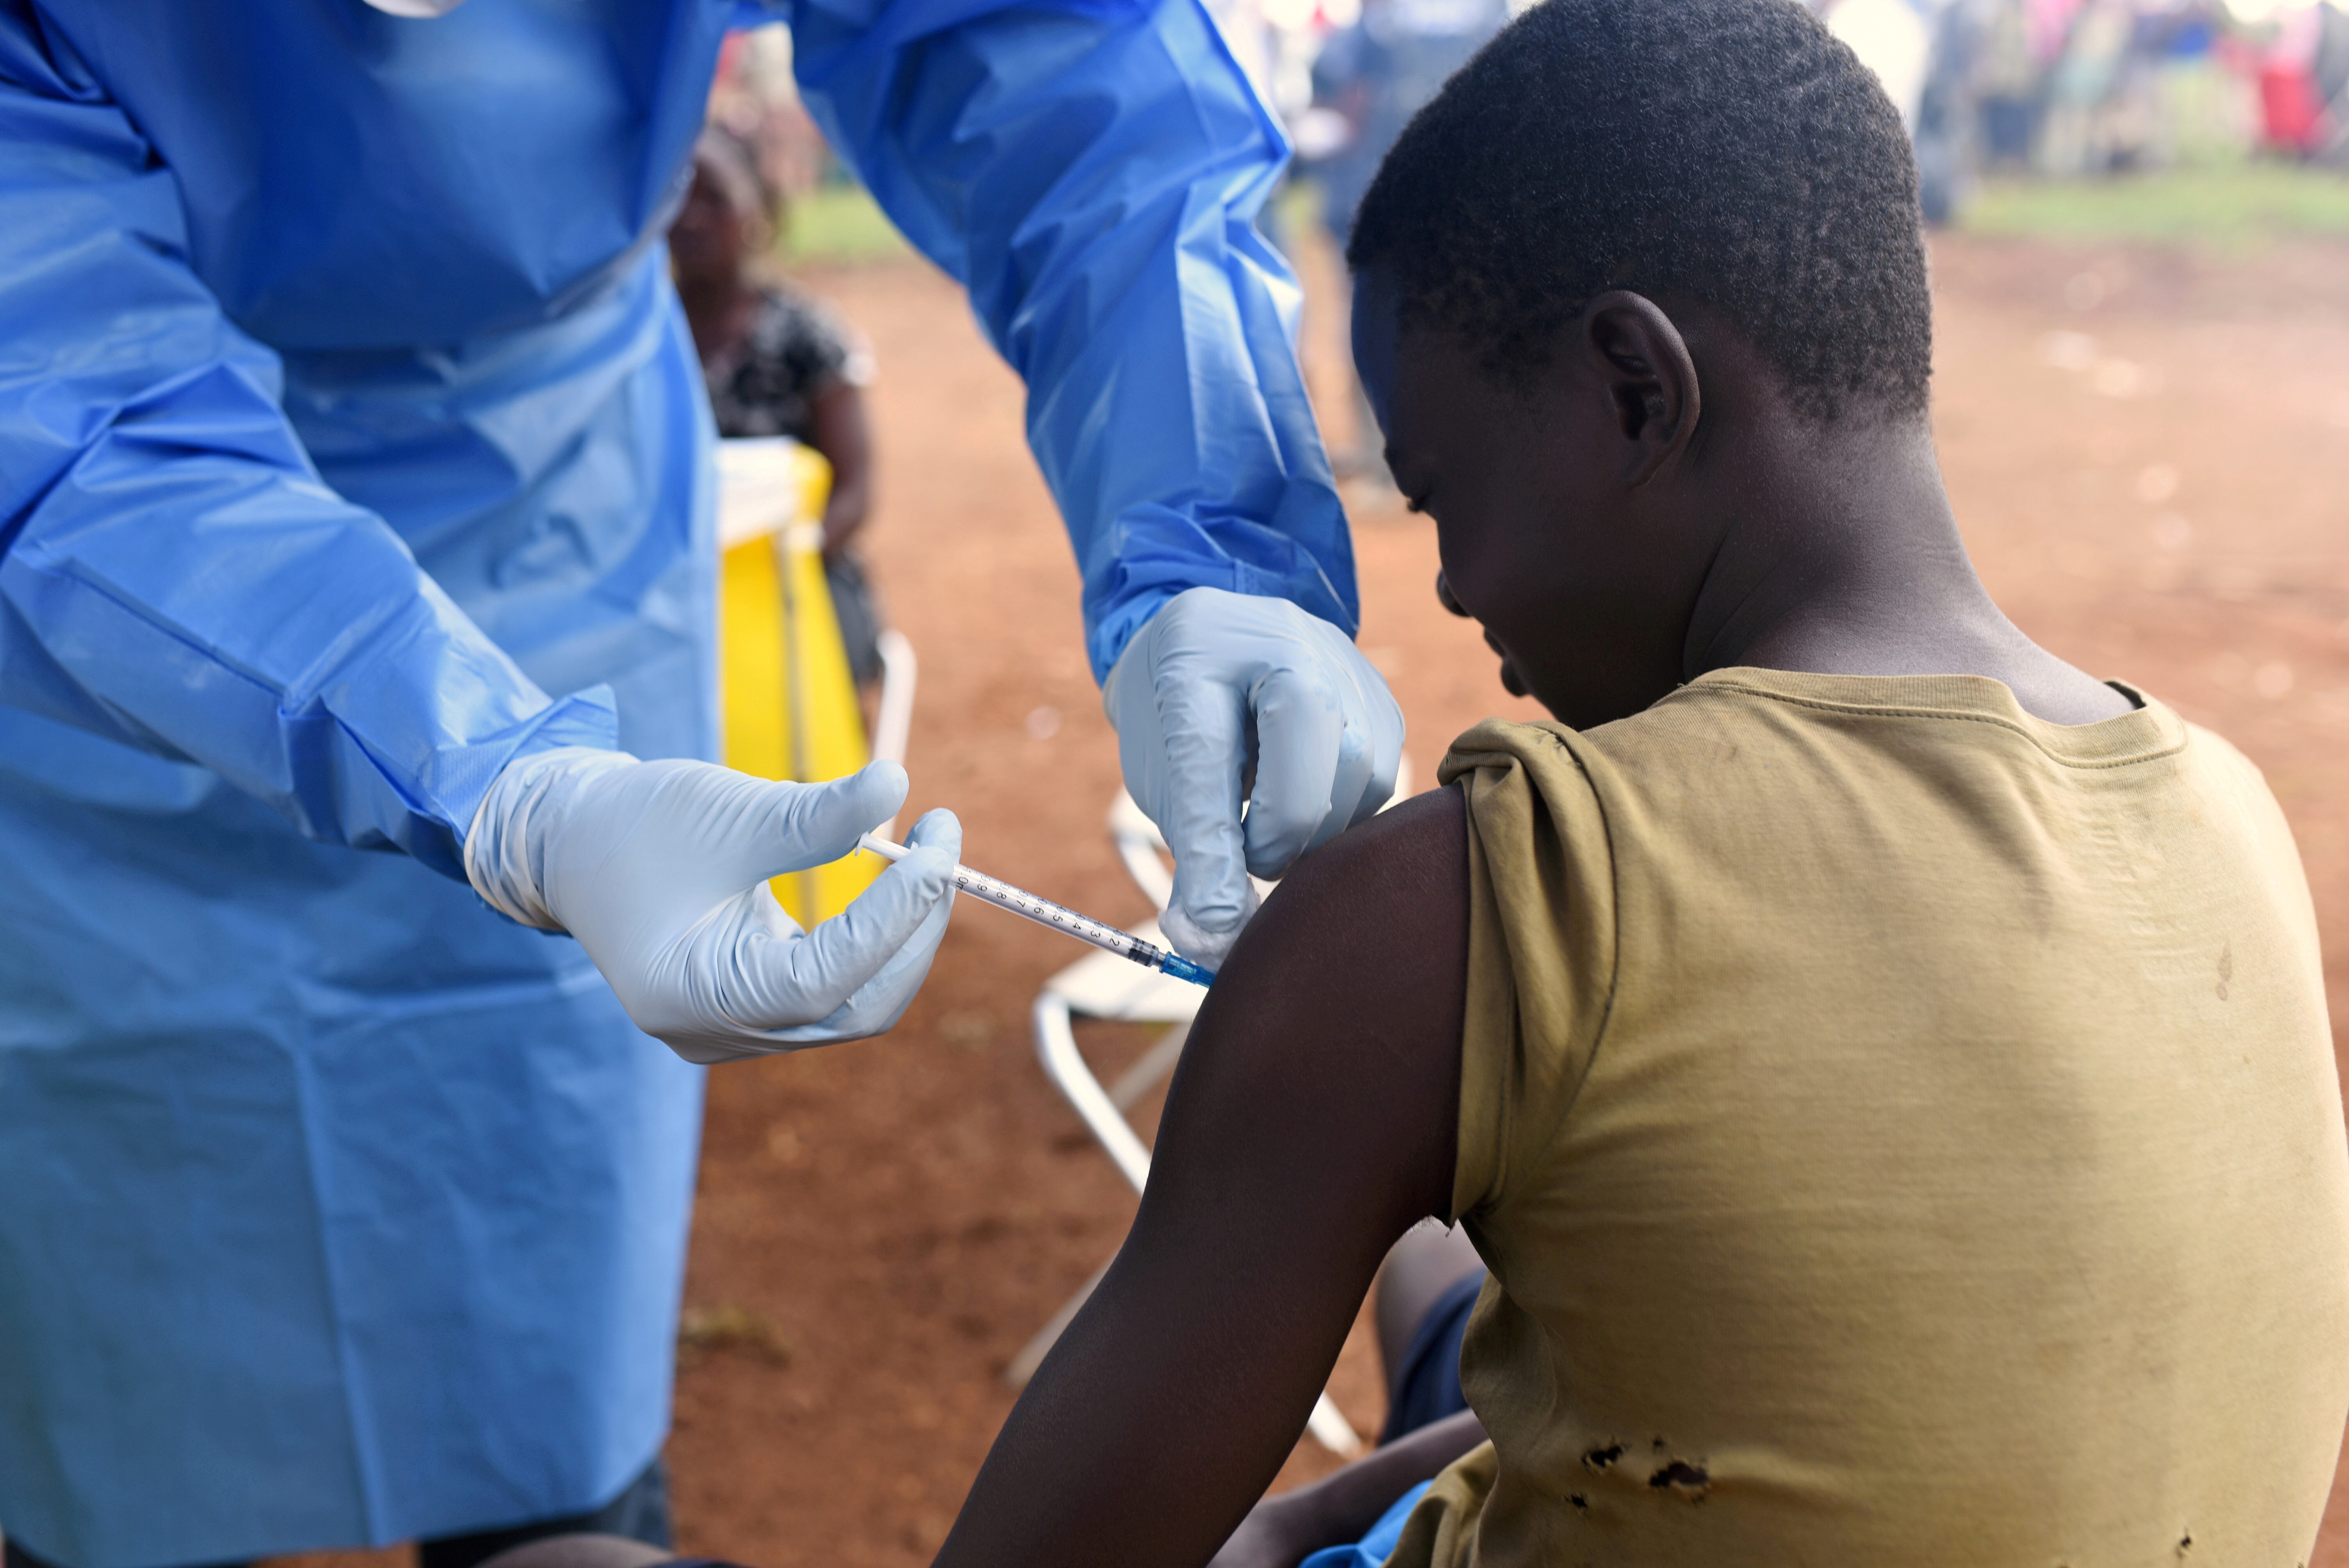 A health worker administers an Ebola vaccine in the Democratic Republic of Congo, amid an outbreak in the country and in Guinea. Photo: Reuters